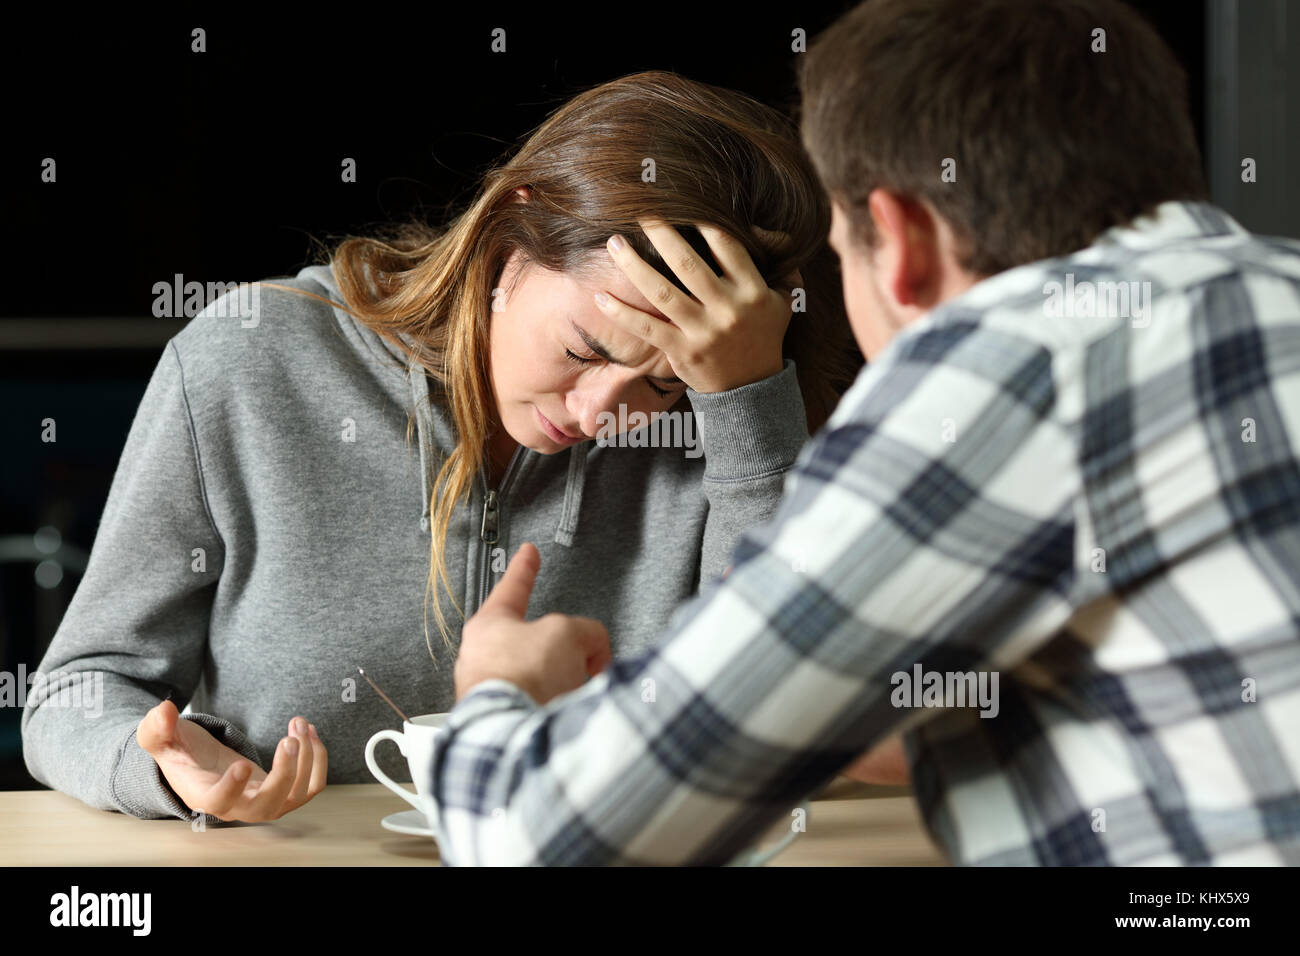 Sad teenager crying during a couple fight in a coffee shop in the night Stock Photo